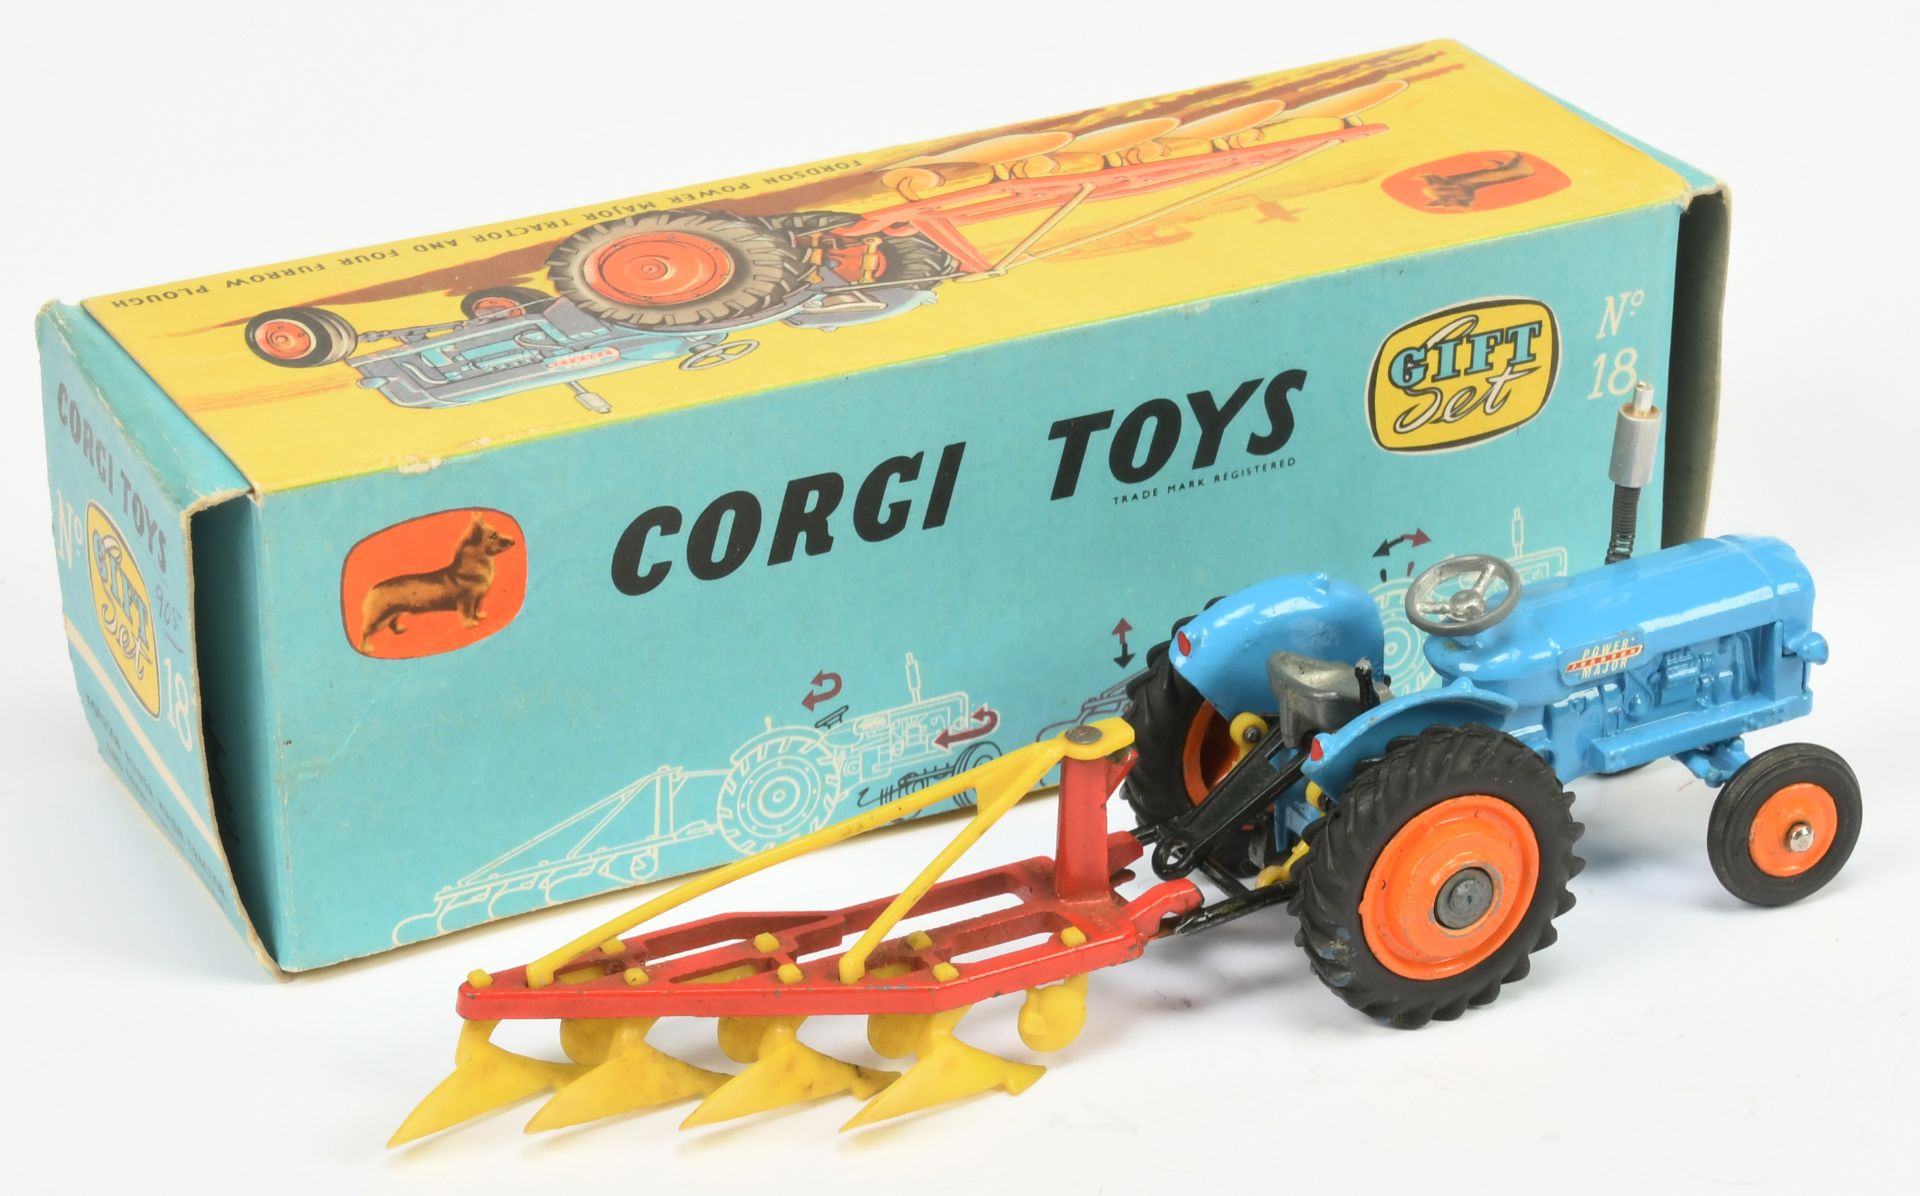 Corgi Toys GS 18 Gift Set - To Include Fordson Power Major Tractor - Blue, silver trim, orange pl... - Image 2 of 2